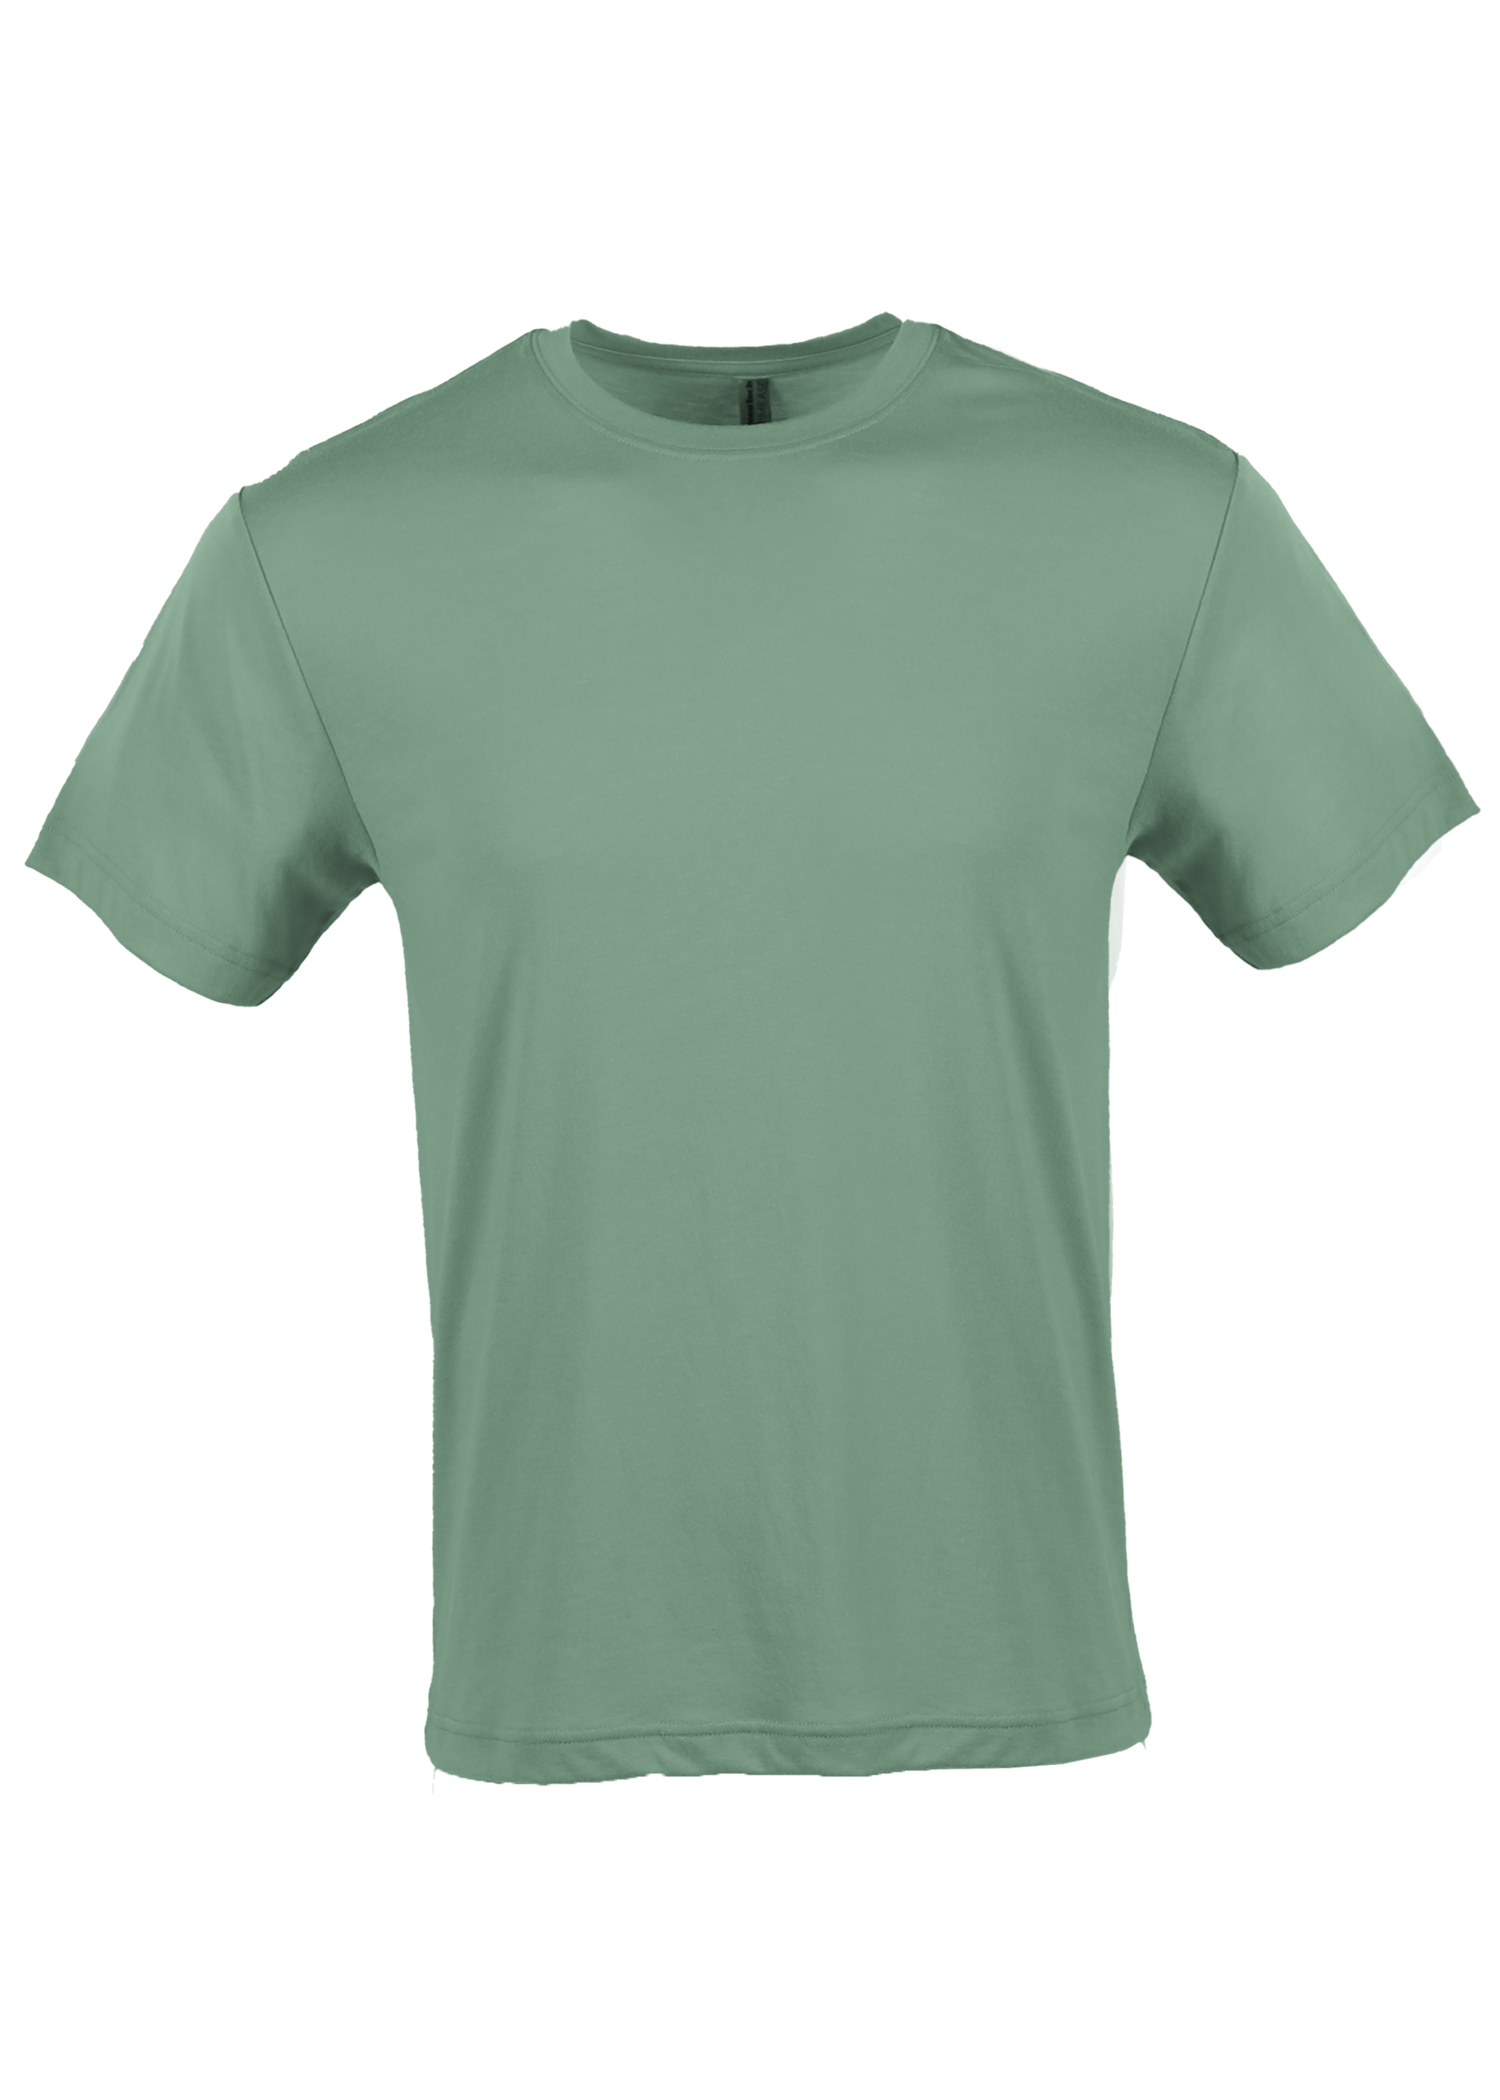 Primease P4406 - Recycled Tri-Blend Tee